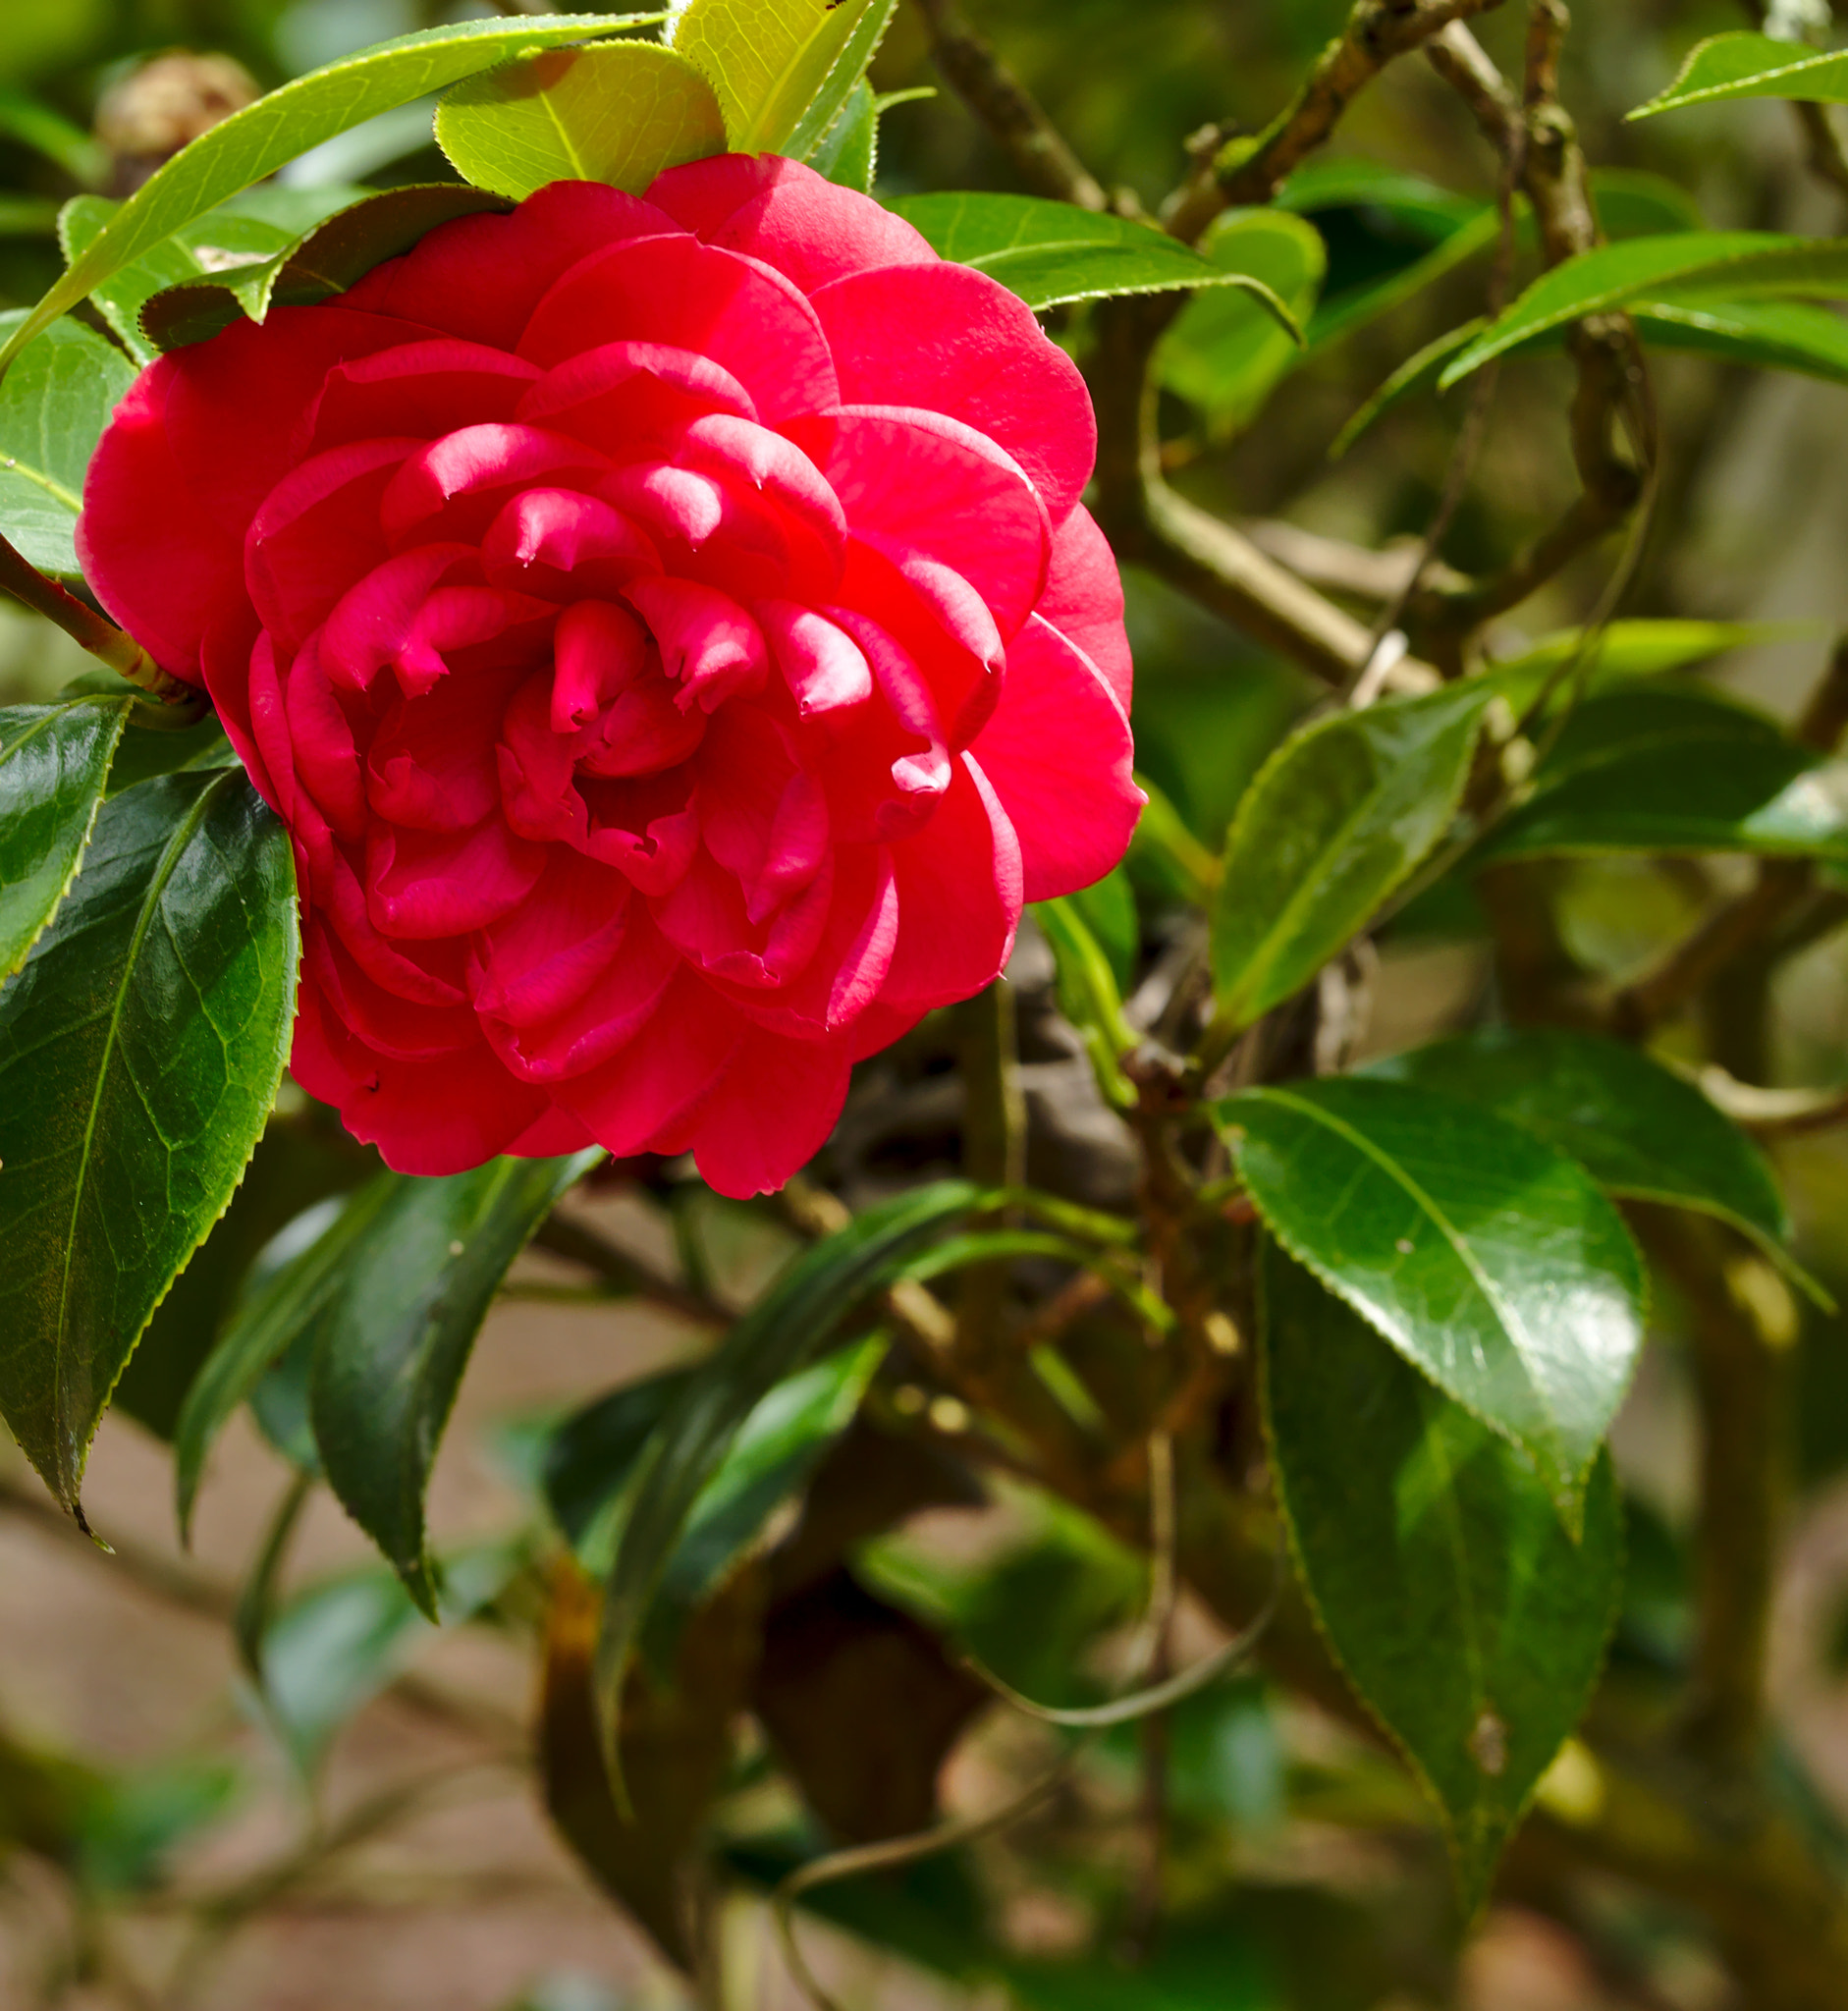 ZEISS Otus 85mm F1.4 sample photo. A spring formal or camellia japonica photography